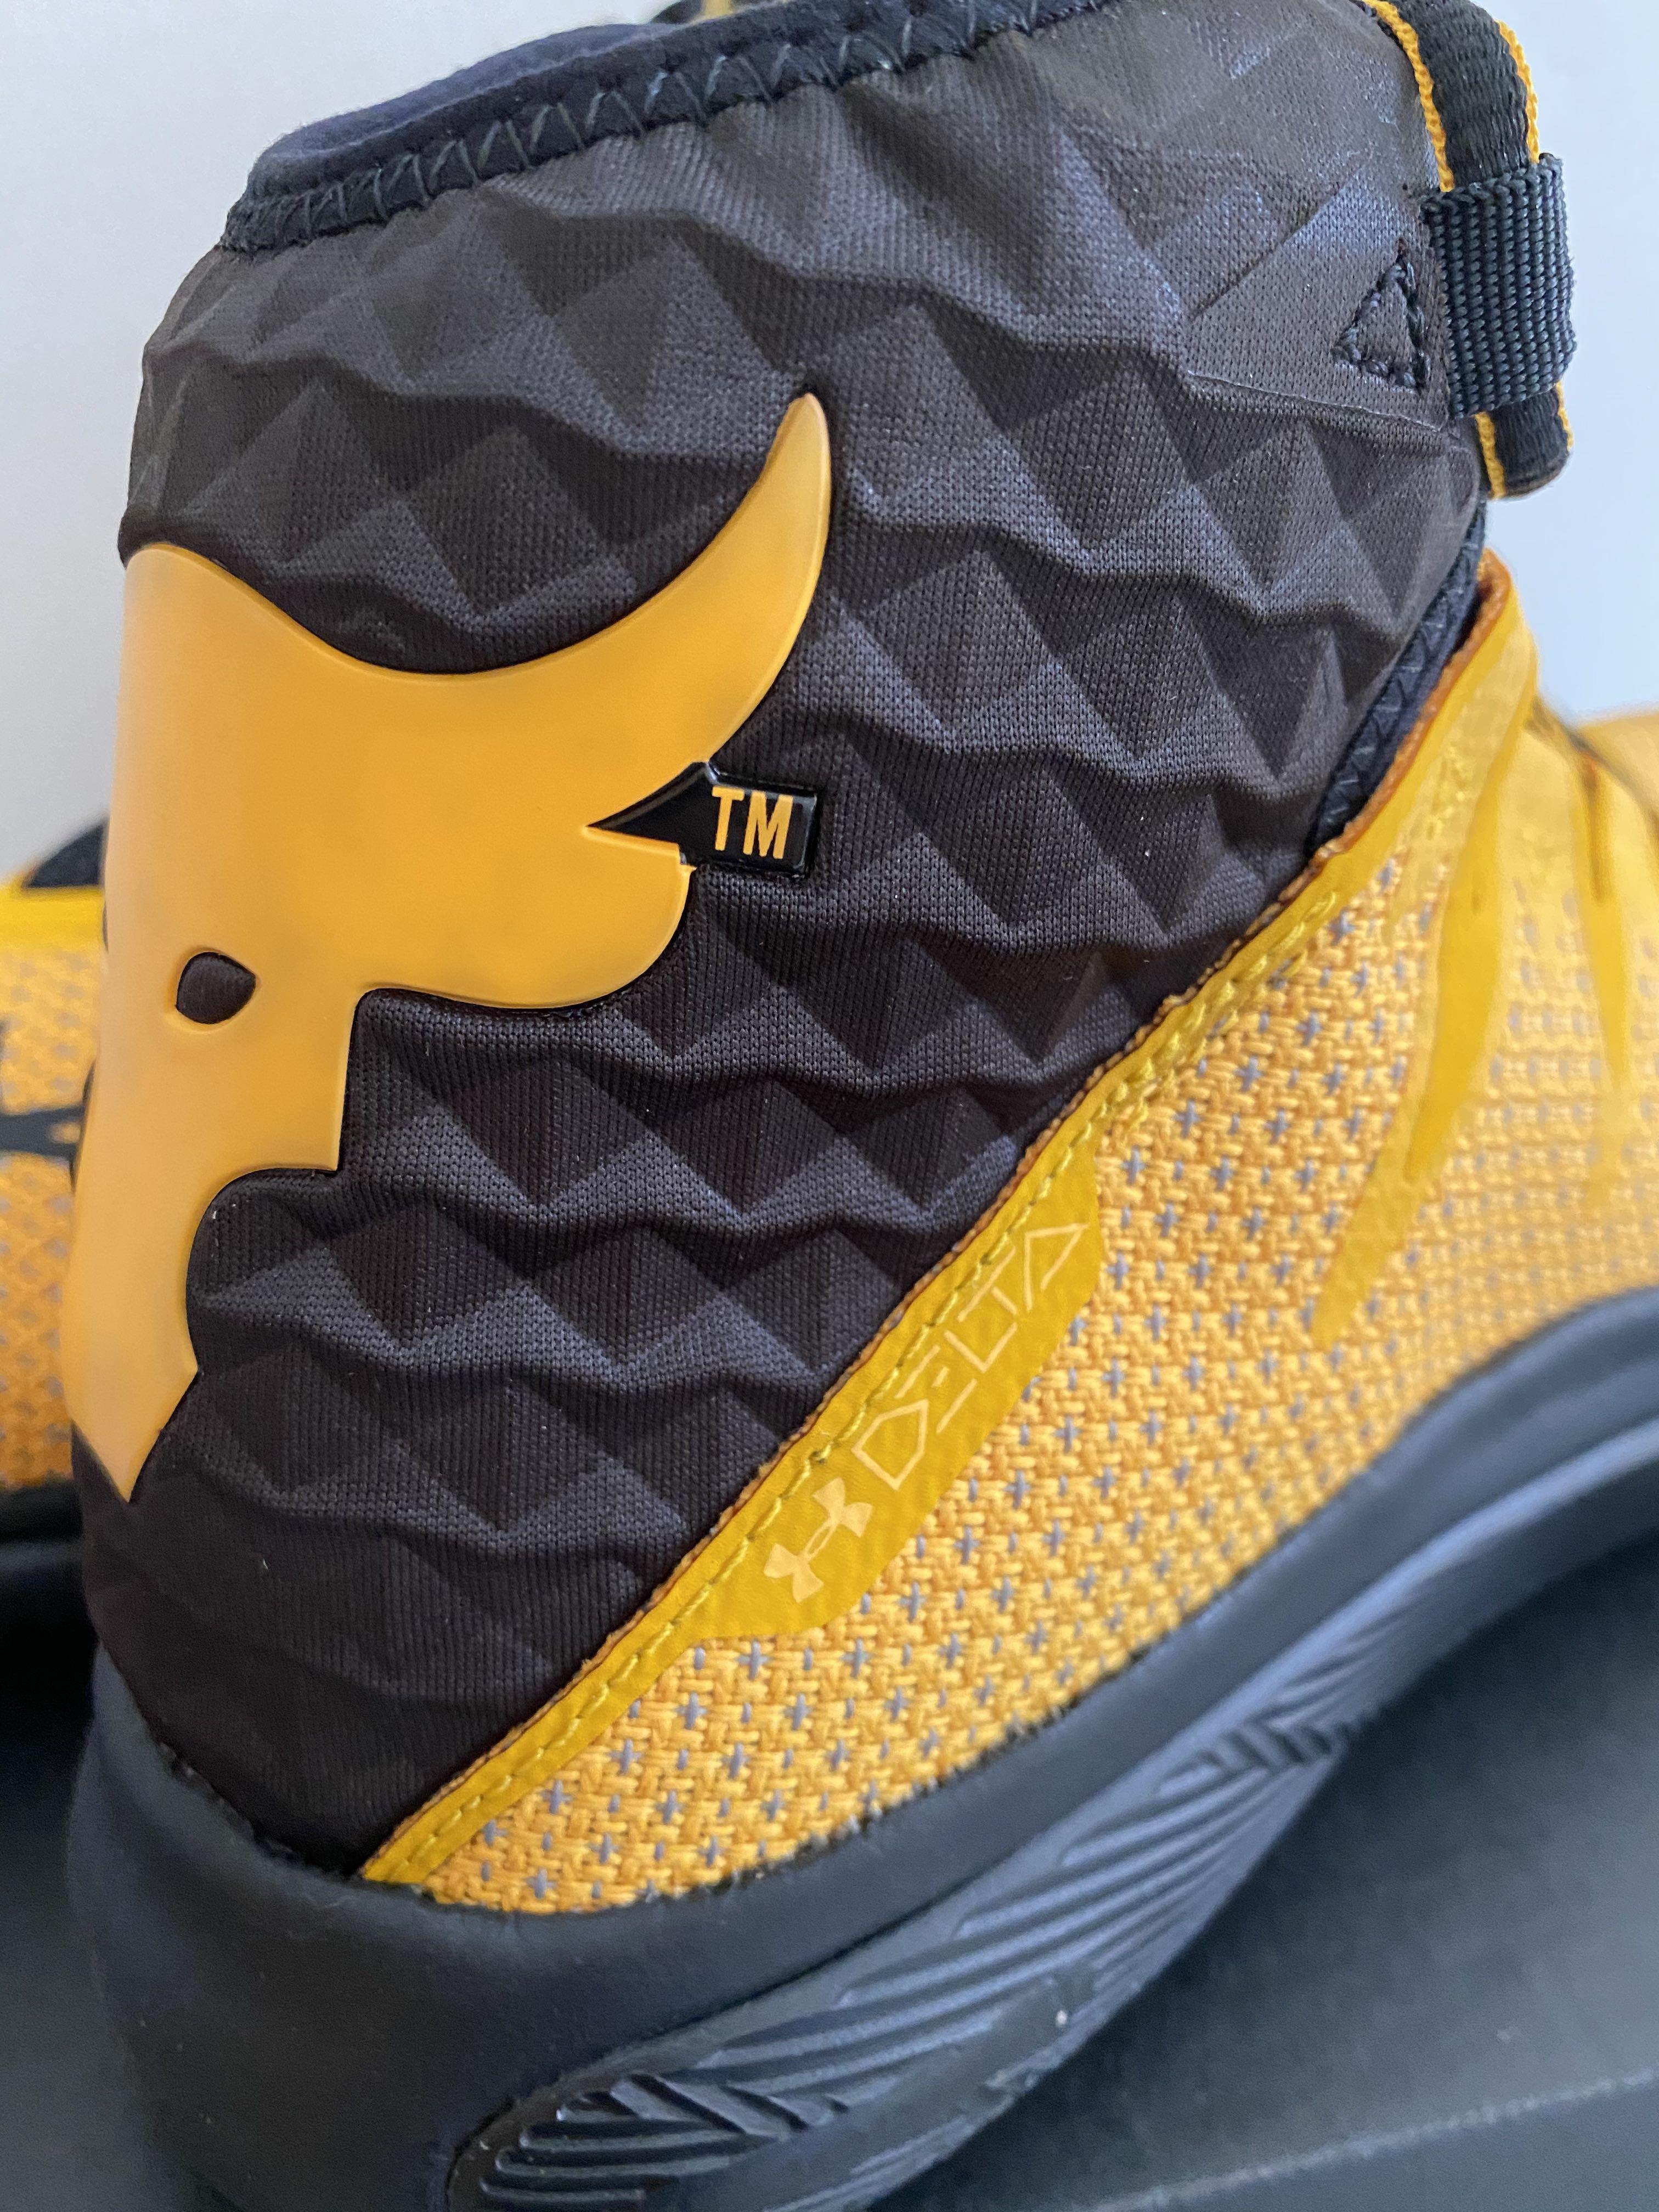 Under Armour The Rock Delta Black Yellow